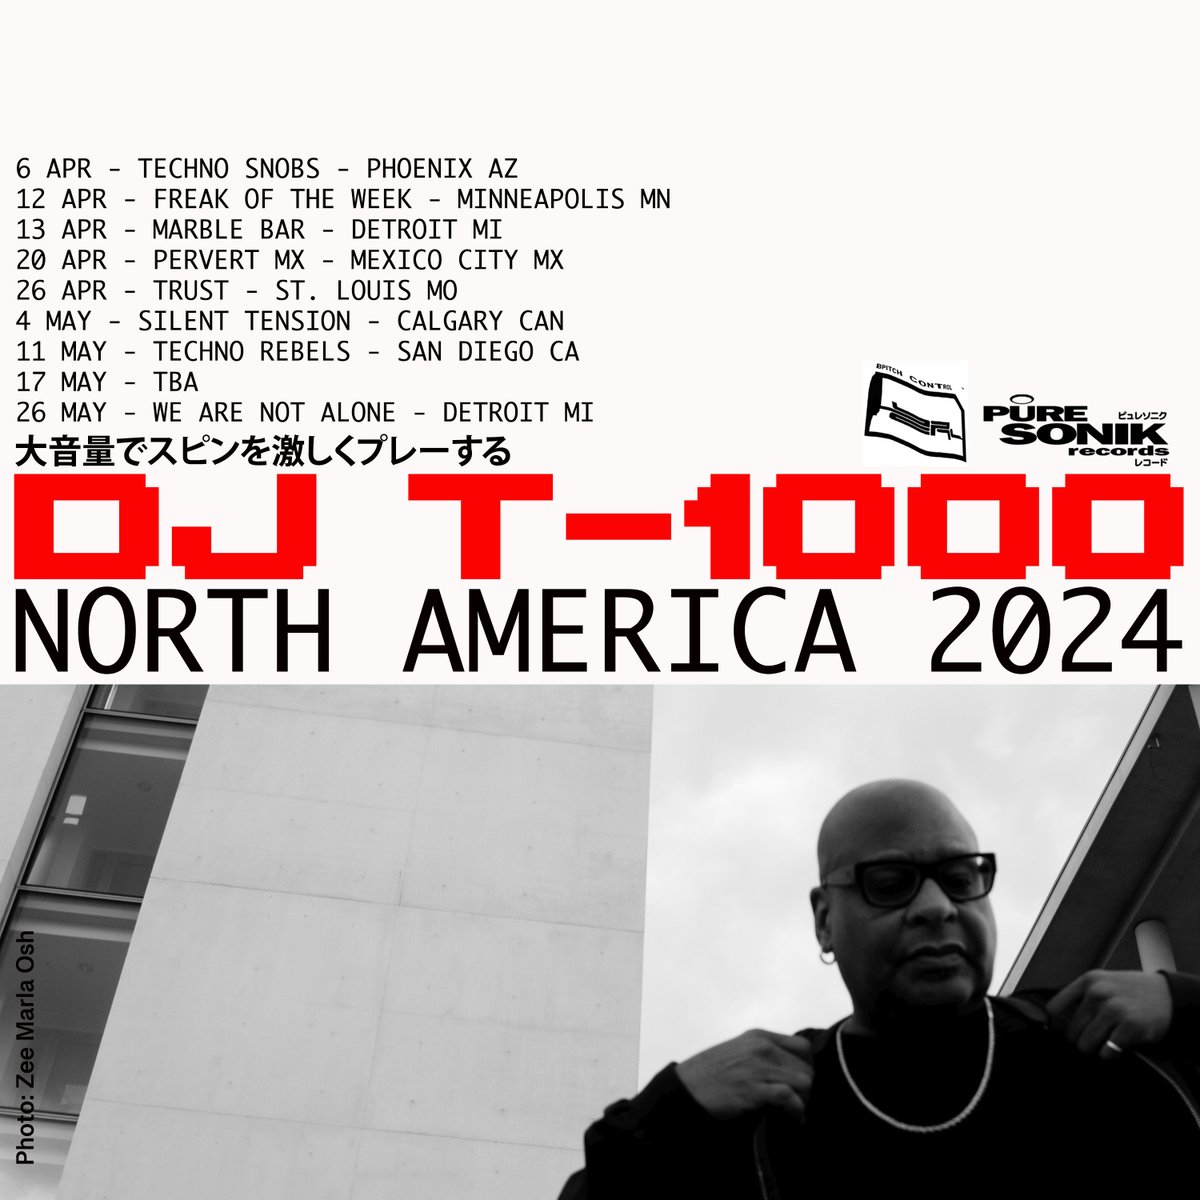 Straight from Berlin to North America, the T-1000 returns to a city near you! See you out there! 🇺🇸🇨🇦🇲🇽 #djt1000 #springtour #puresonikrecords #detroittechno #berlintechno @BPitchControl